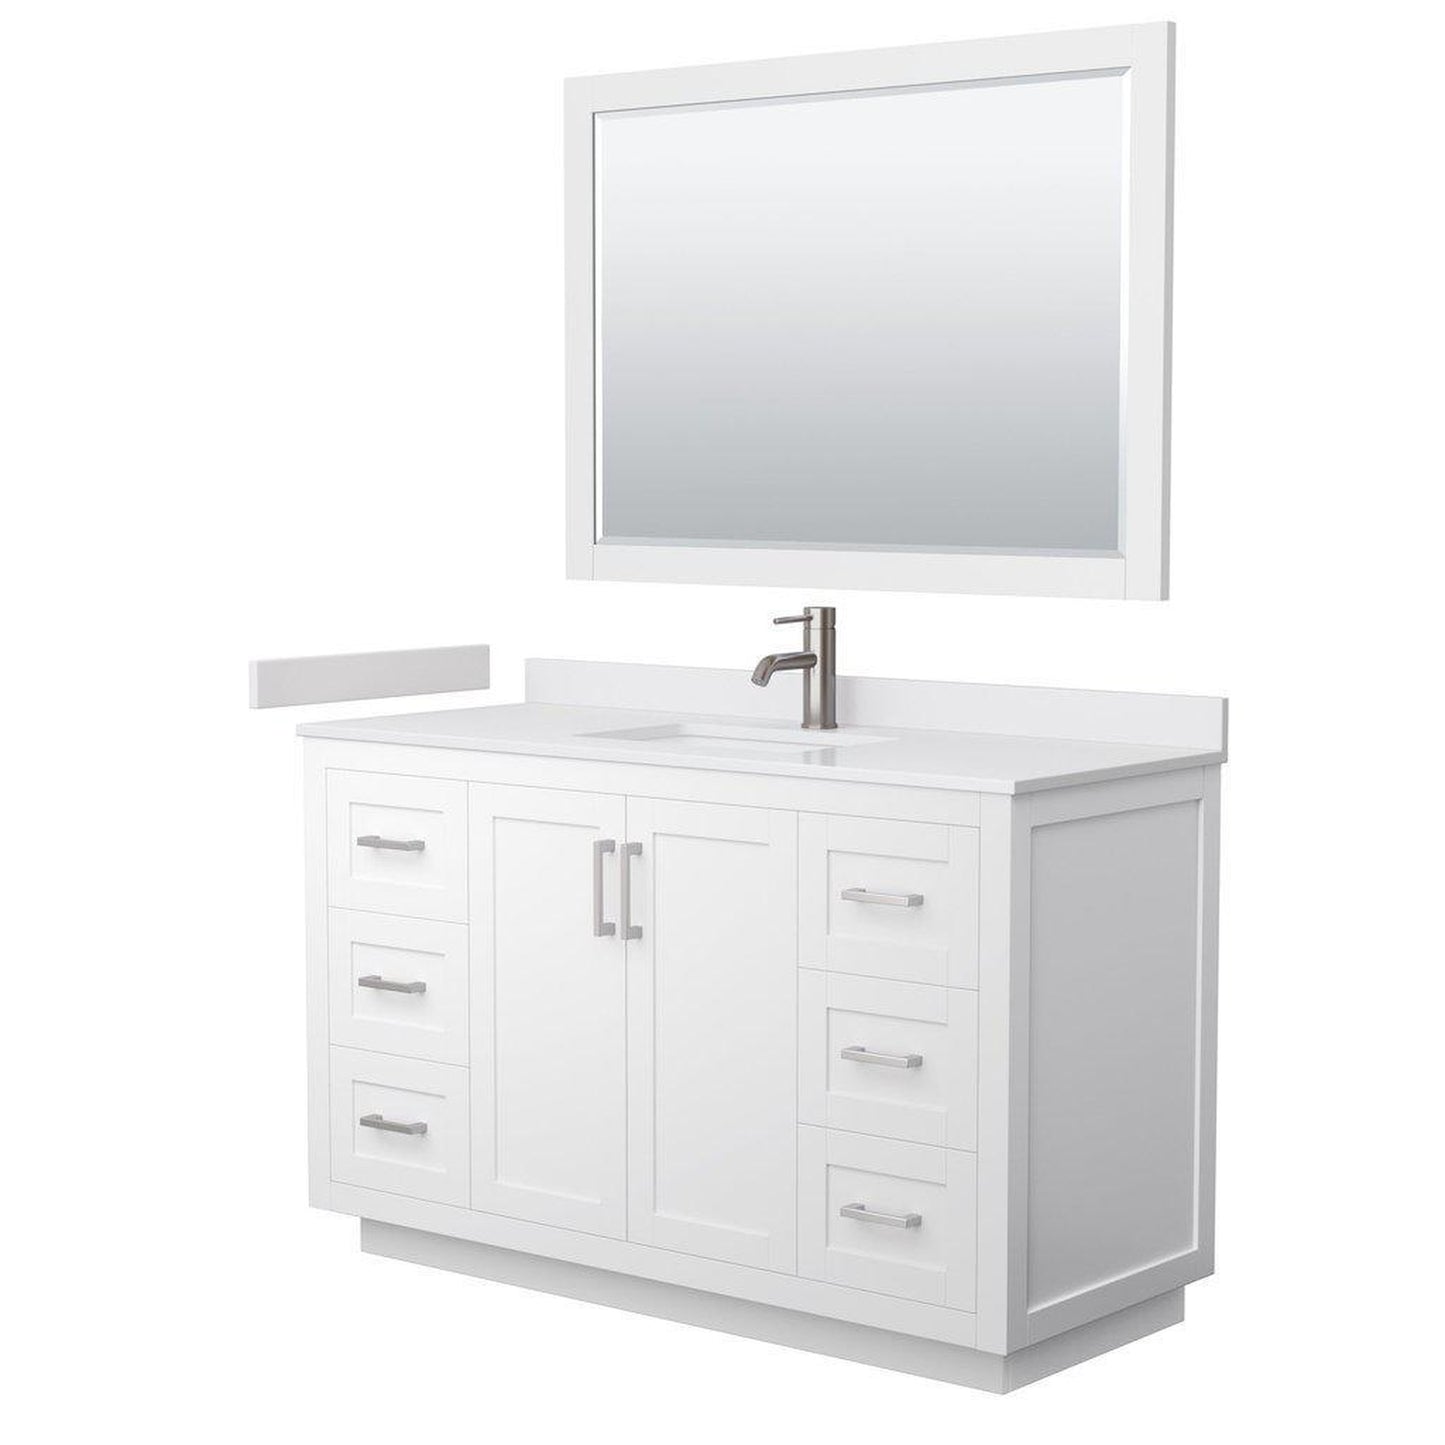 Wyndham Collection Miranda 54" Single Bathroom White Vanity Set With White Cultured Marble Countertop, Undermount Square Sink, 46" Mirror And Brushed Nickel Trim